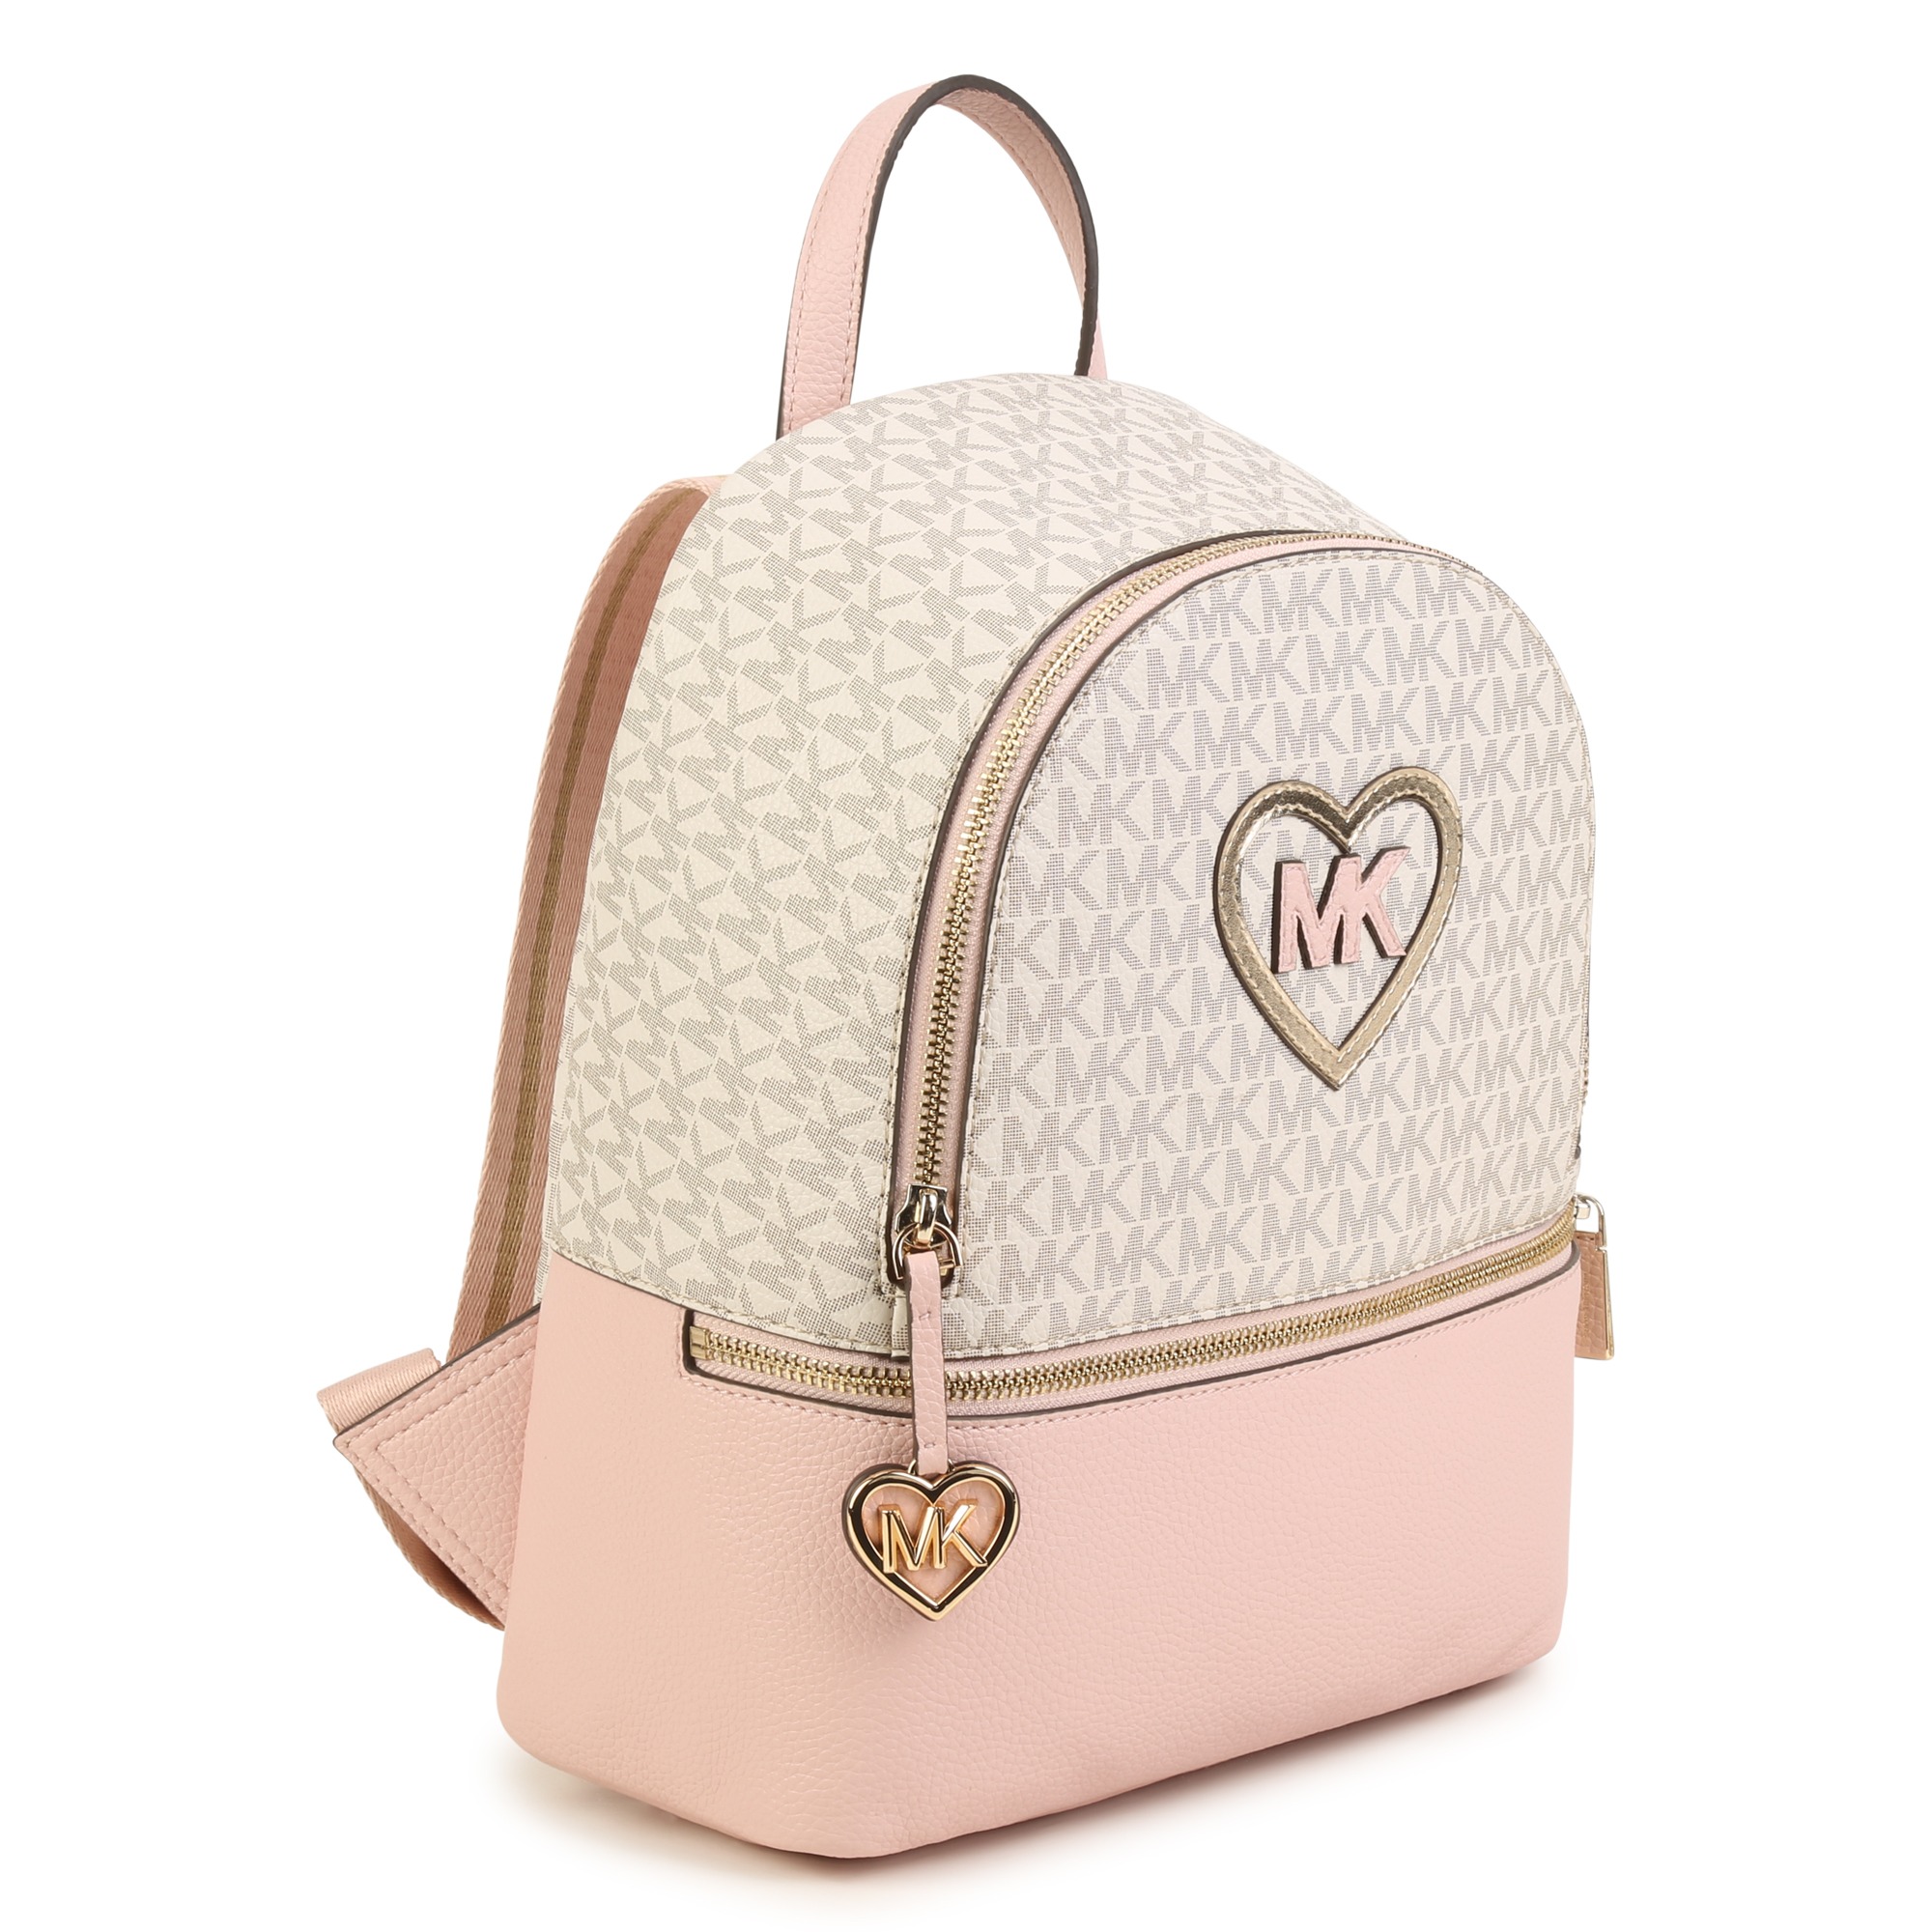 Coated canvas backpack MICHAEL KORS for GIRL